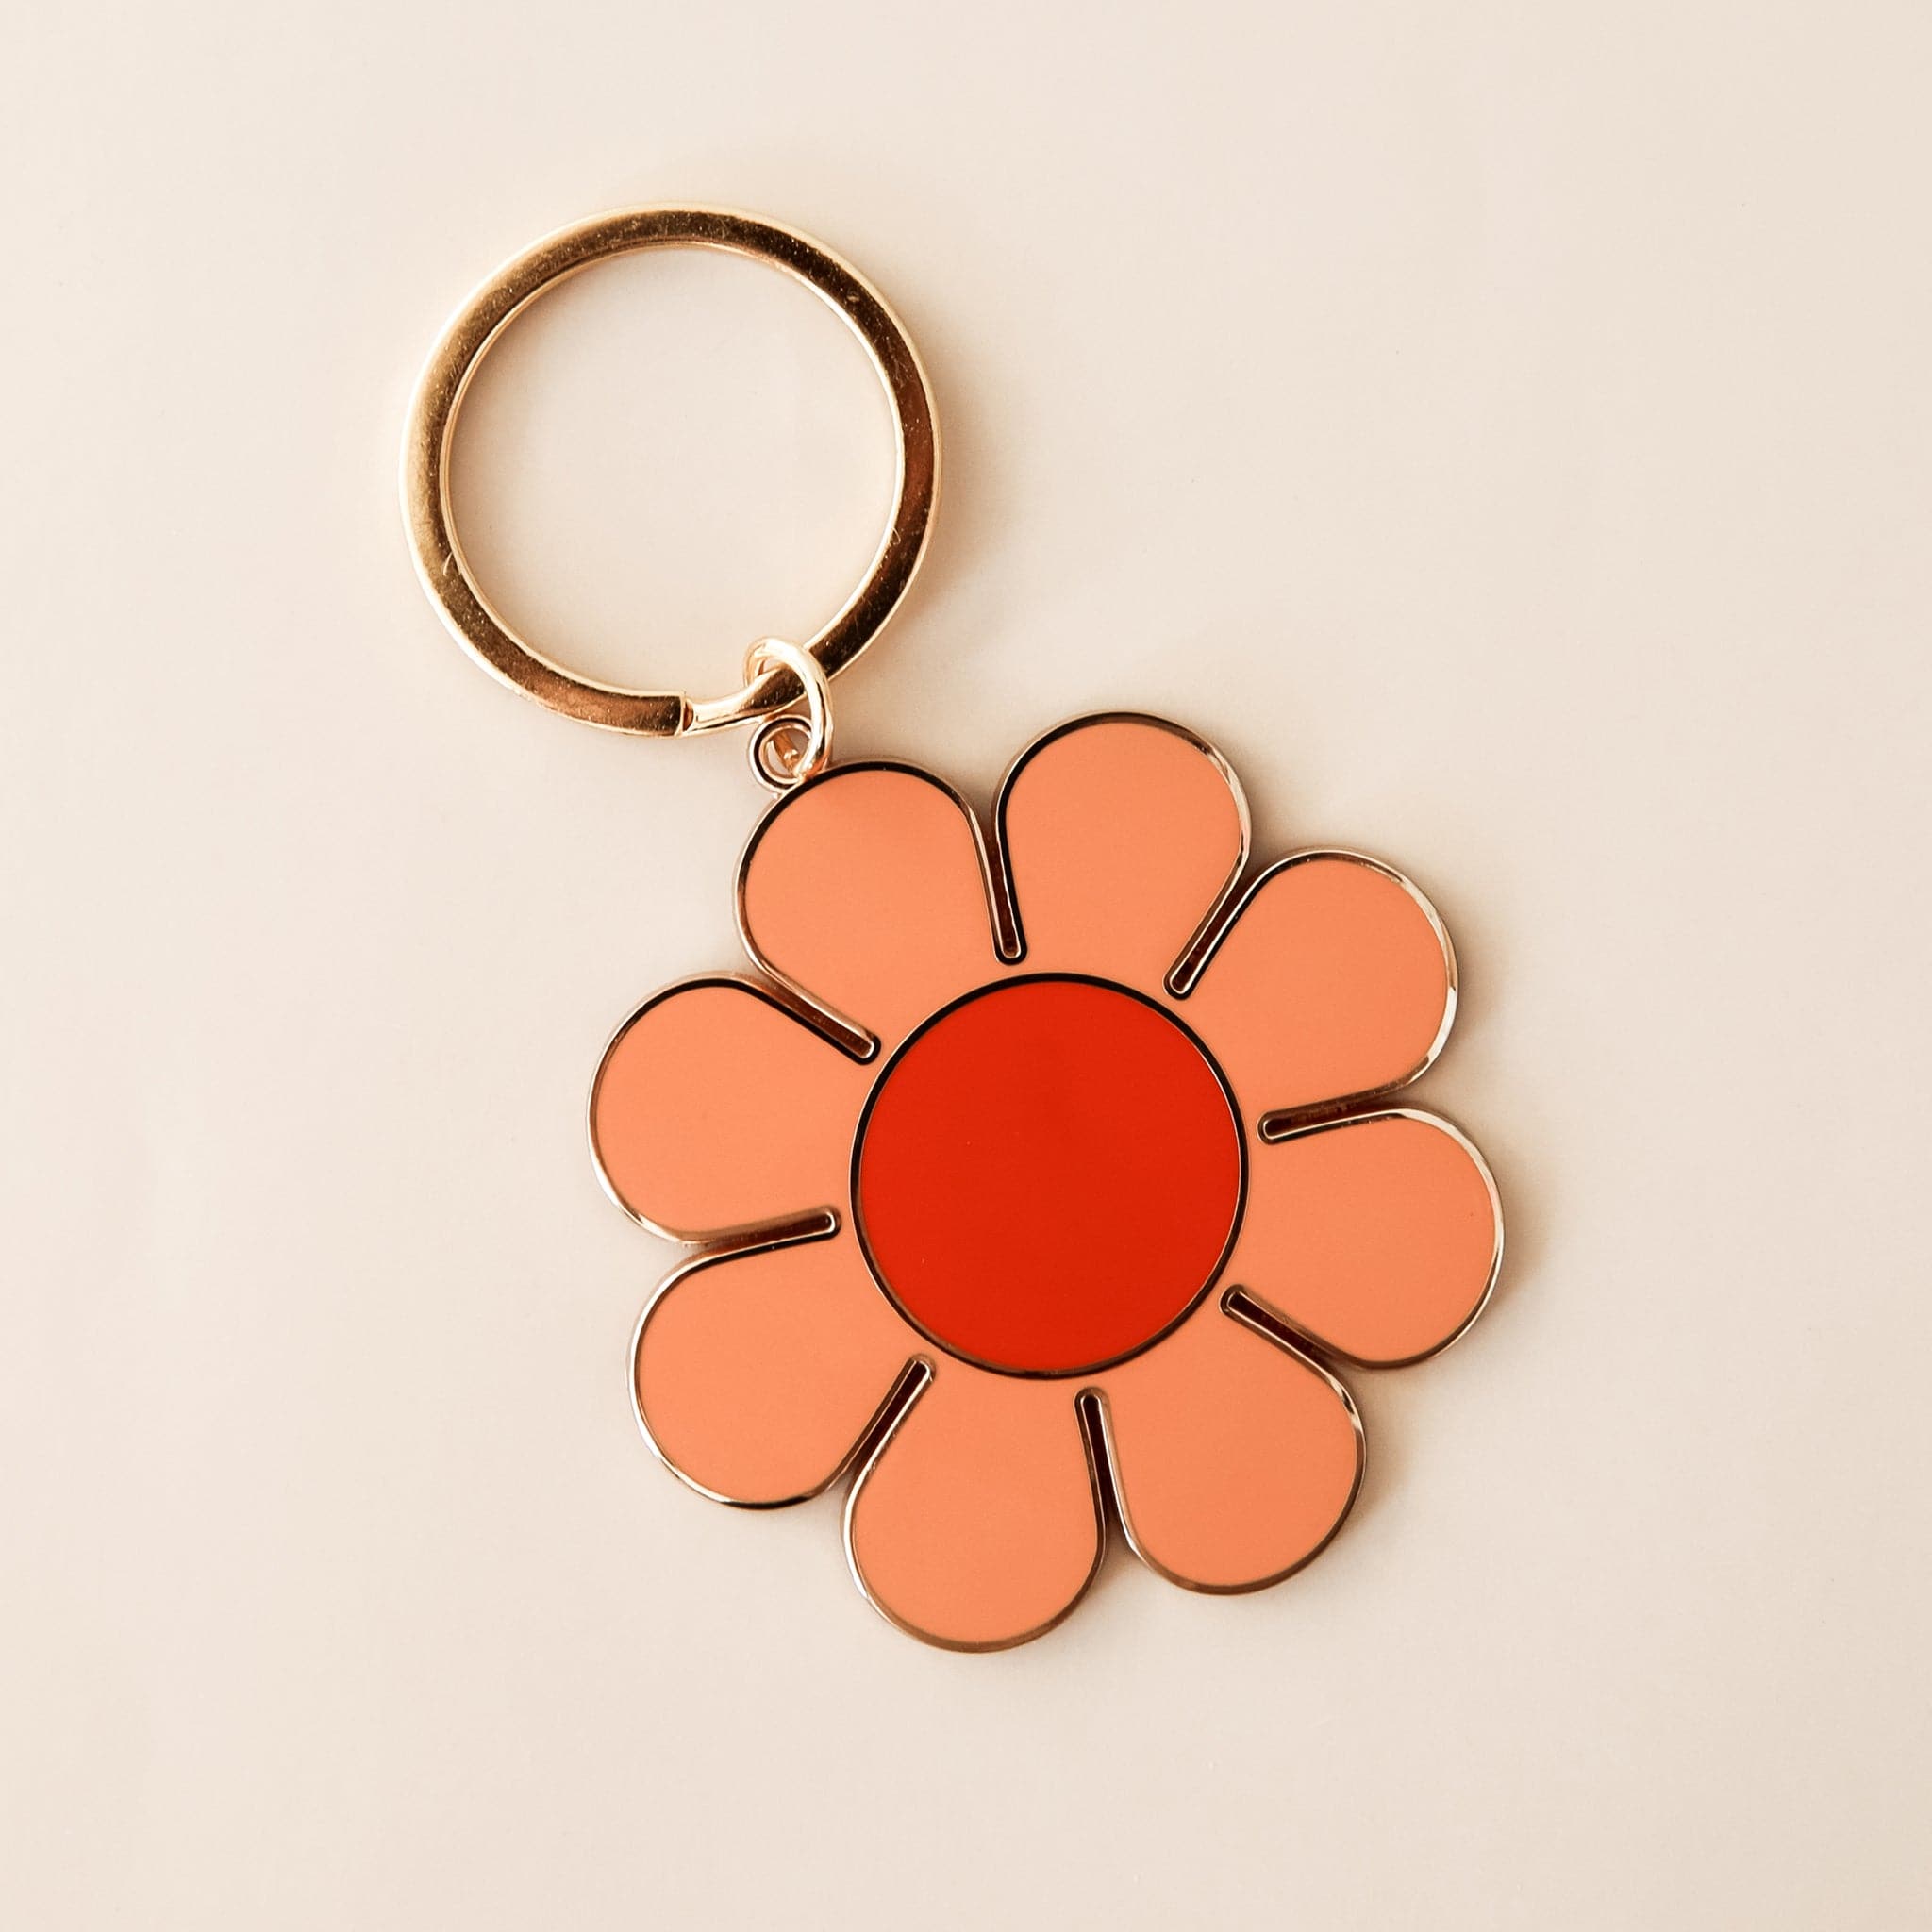 Light orange daisy keychain on a gold ring with a red center. 